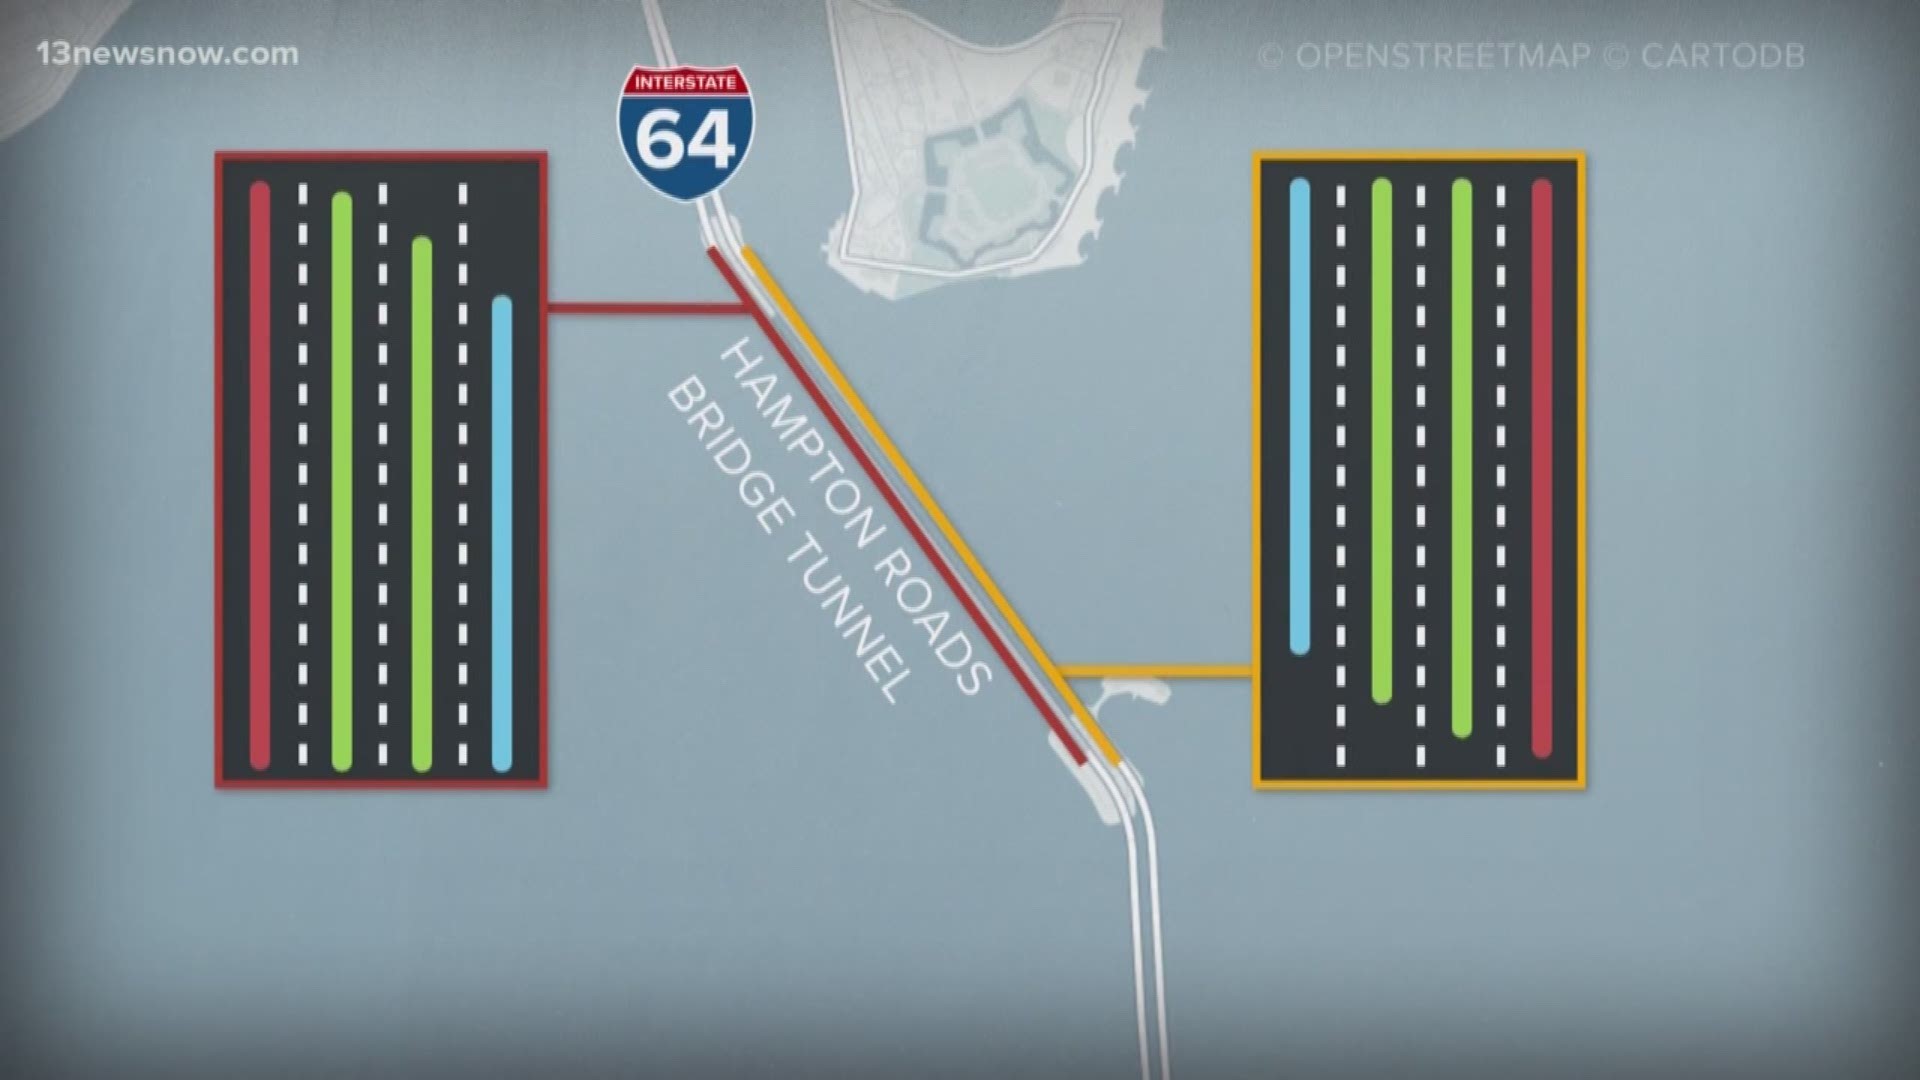 The Hampton Roads Bridge Tunnel $3.6 billion expansion was approved unanimously. It will go from four lanes to eight lanes.